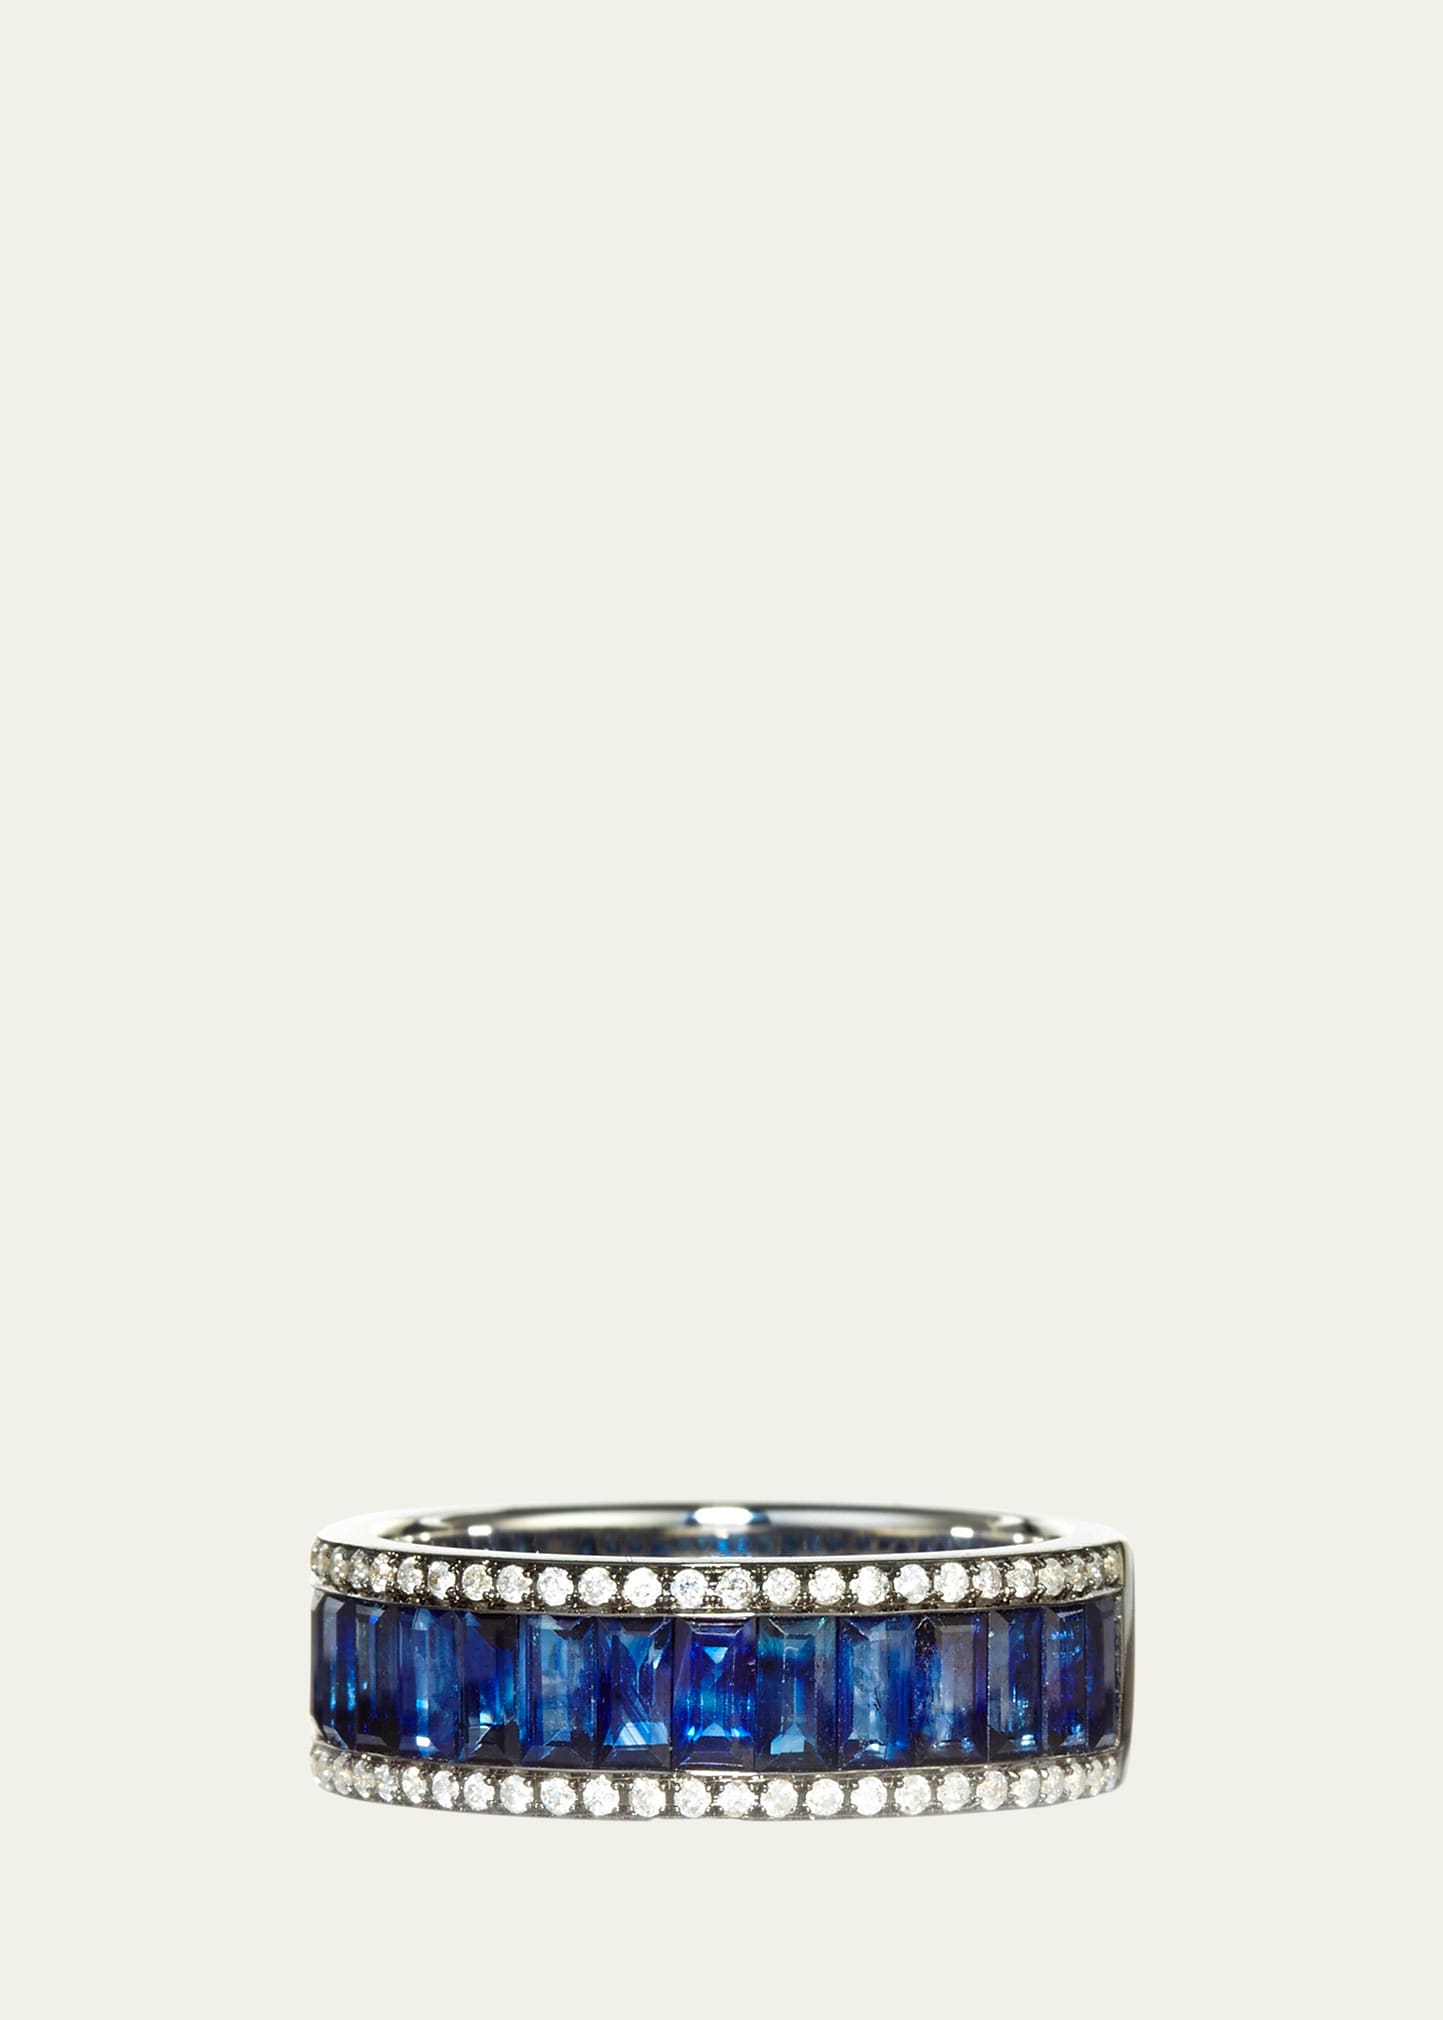 18K White Gold Black Rhodium Eternity Band Ring with Diamonds and Sapphires